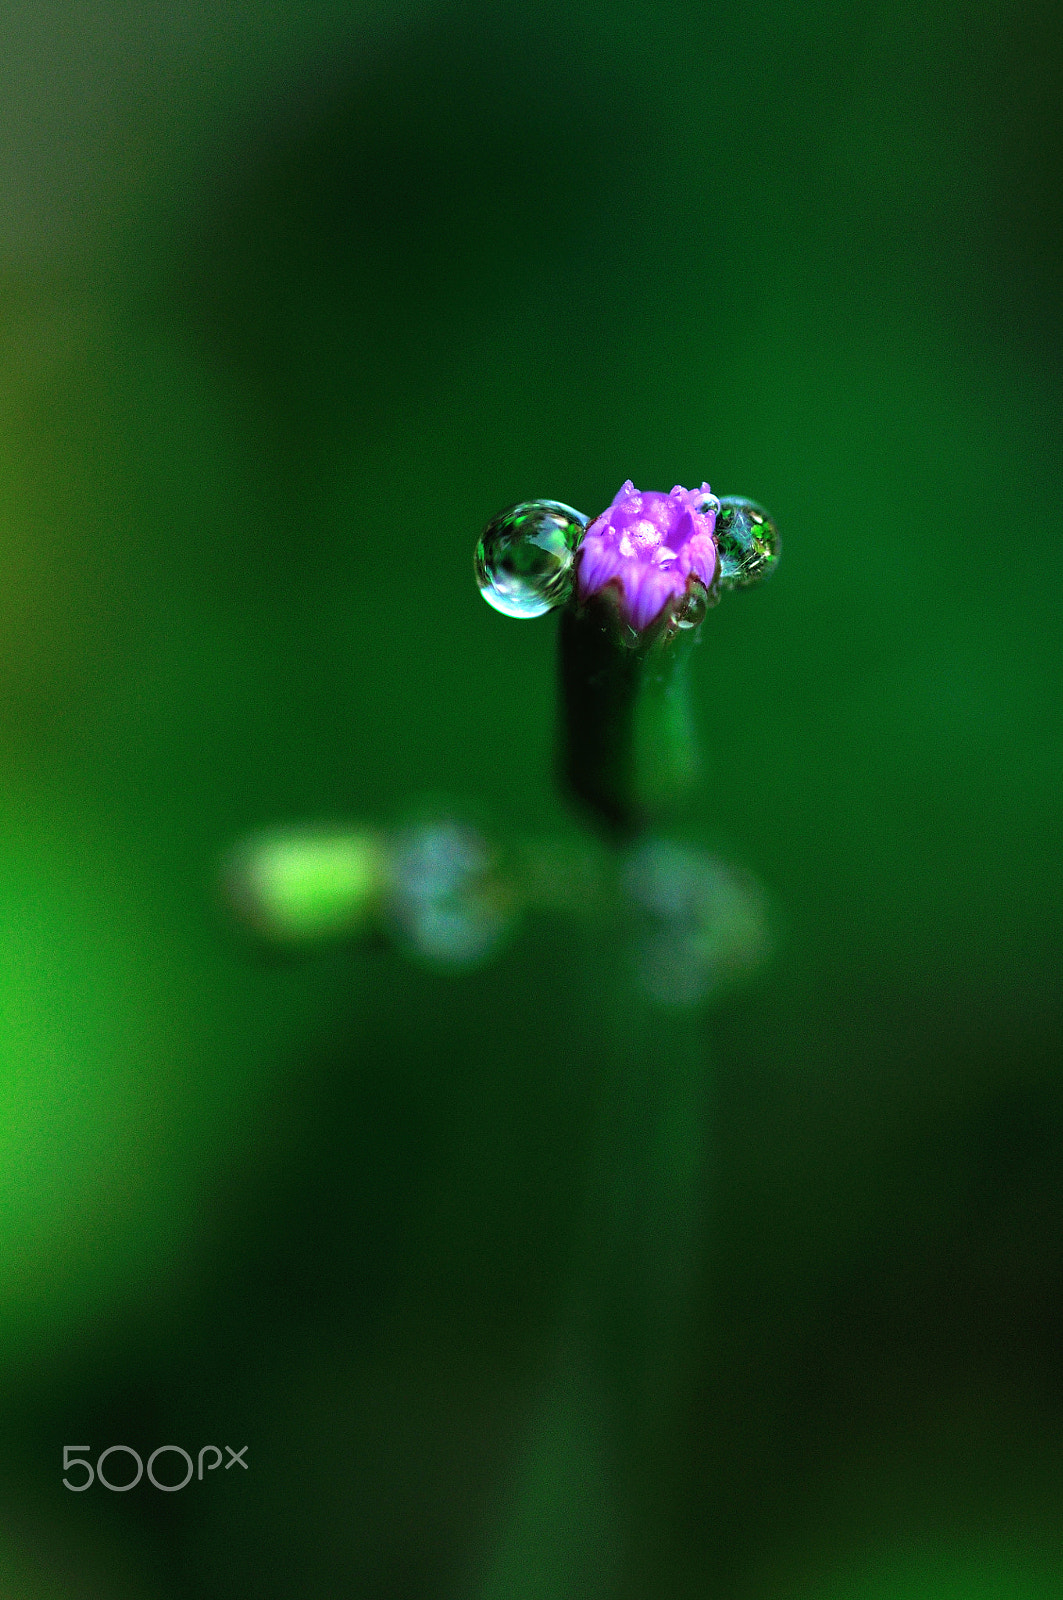 Nikon D90 + Tamron SP 90mm F2.8 Di VC USD 1:1 Macro sample photo. Wild flowers with raindrops photography